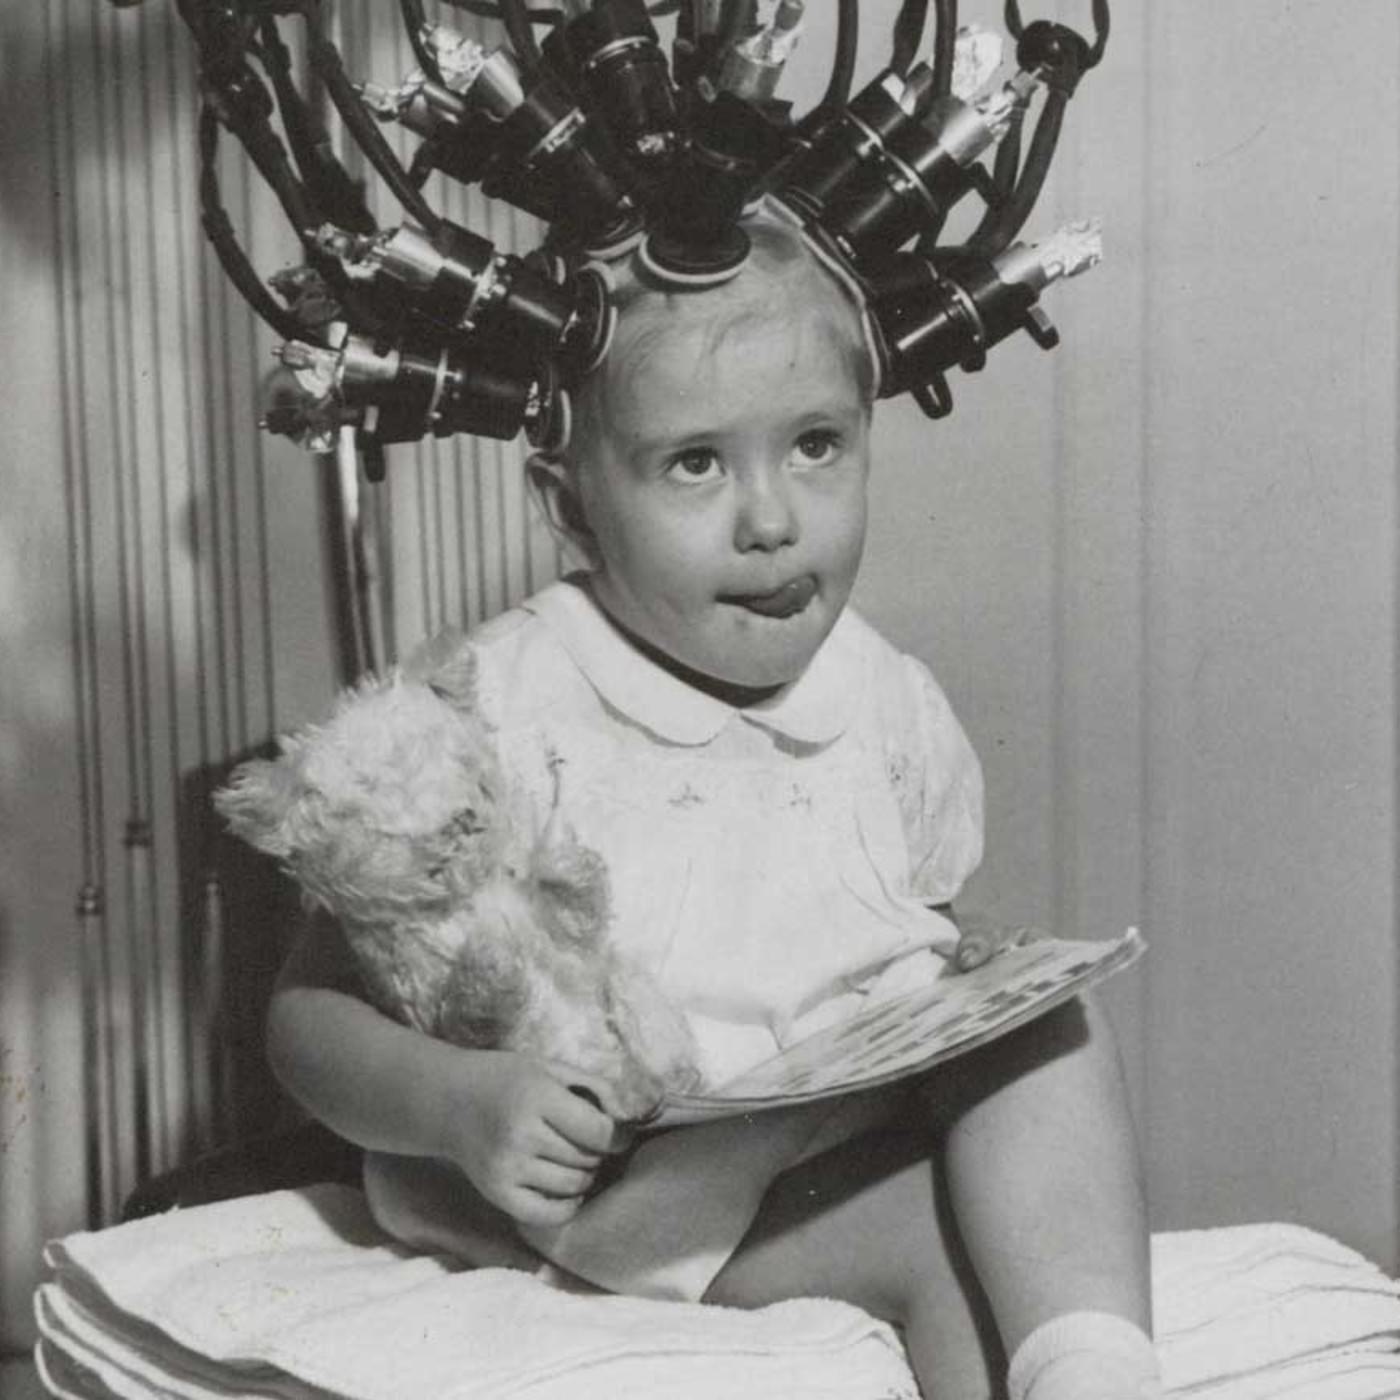 A young girl getting her hair curled, marketed as a permanent procedure, to look like Shirley Temple in Berlin, Germany in 1938.